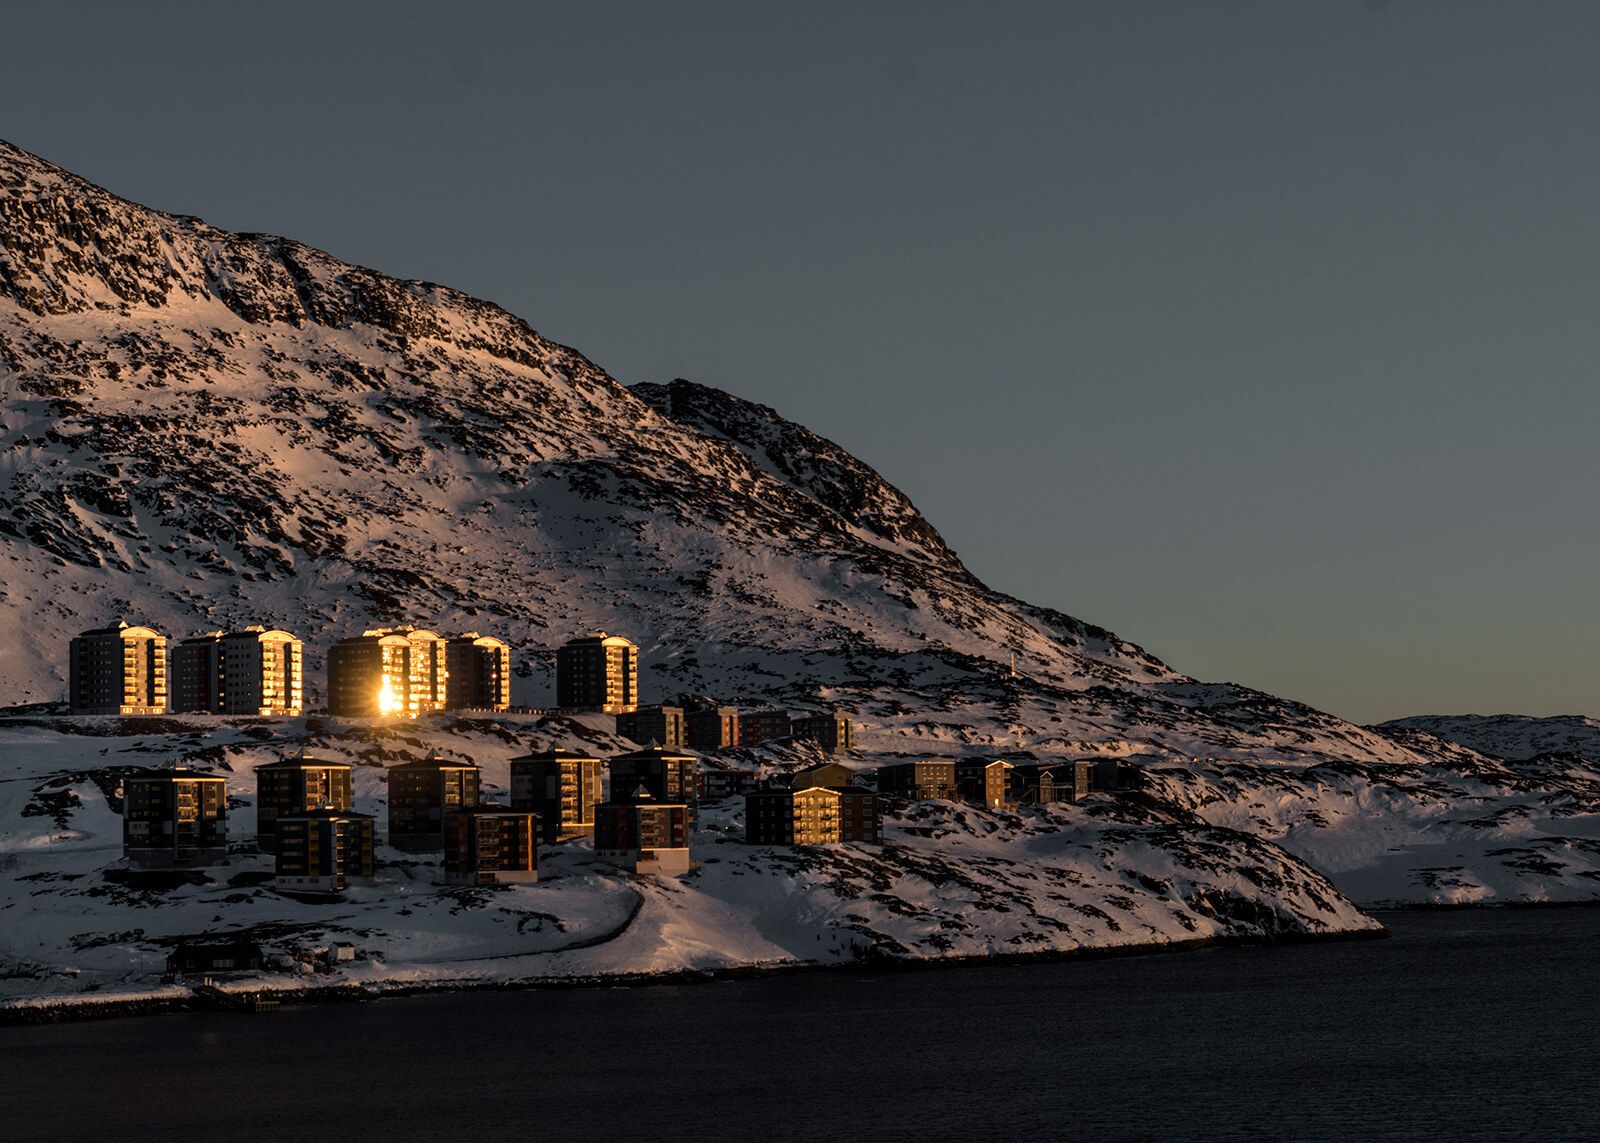 New apartment buildings catch the last rays of the sunset in Nuuk, which has a population of 17,500. Image by Jonas Bendiksen/Magnum Photos. Greenland, 2018.